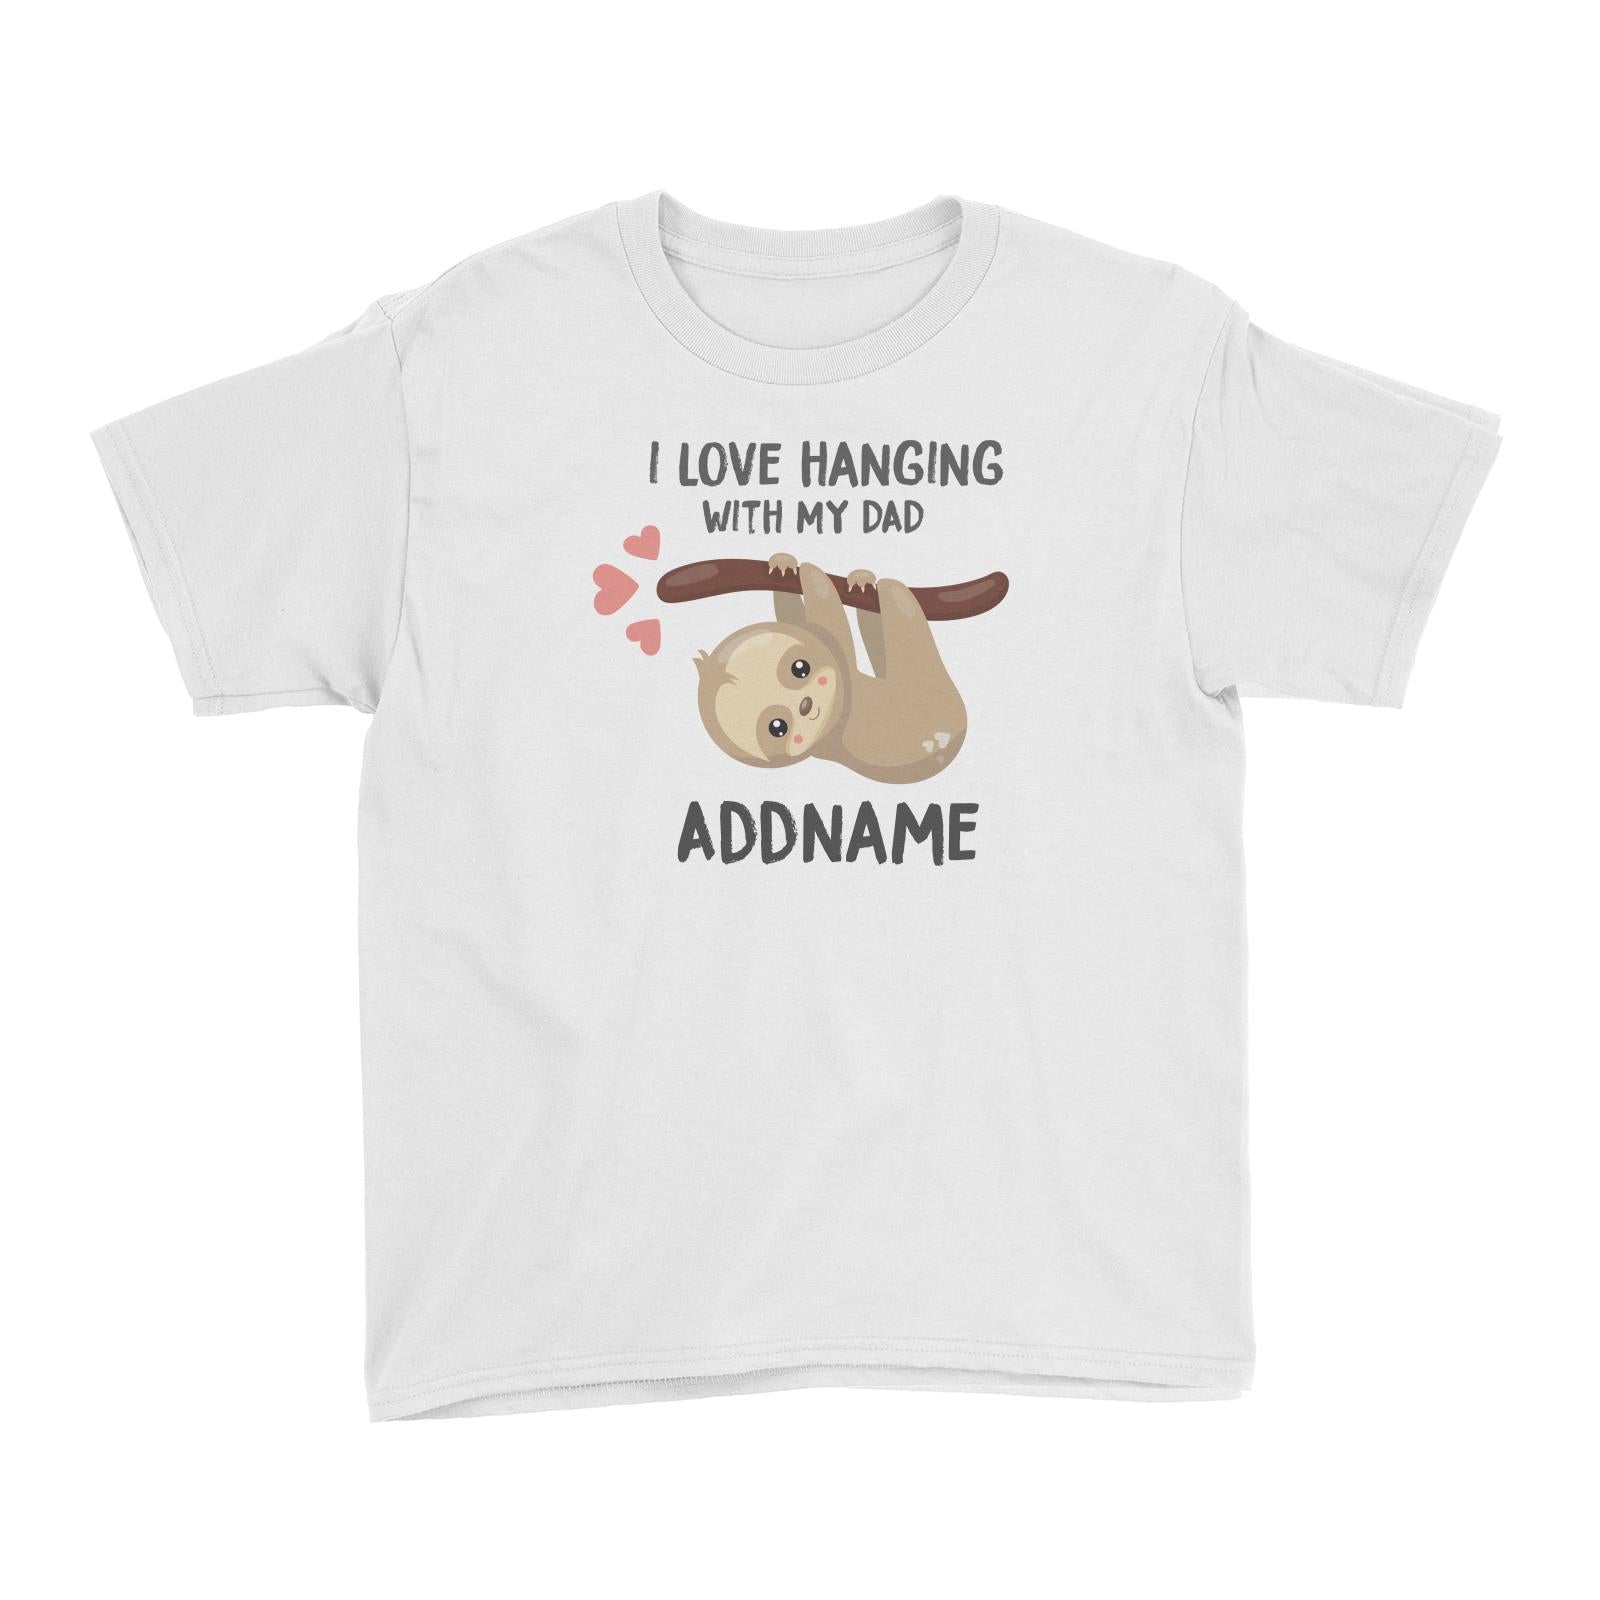 Cute Sloth I Love Hanging With My Dad Addname Kid's T-Shirt